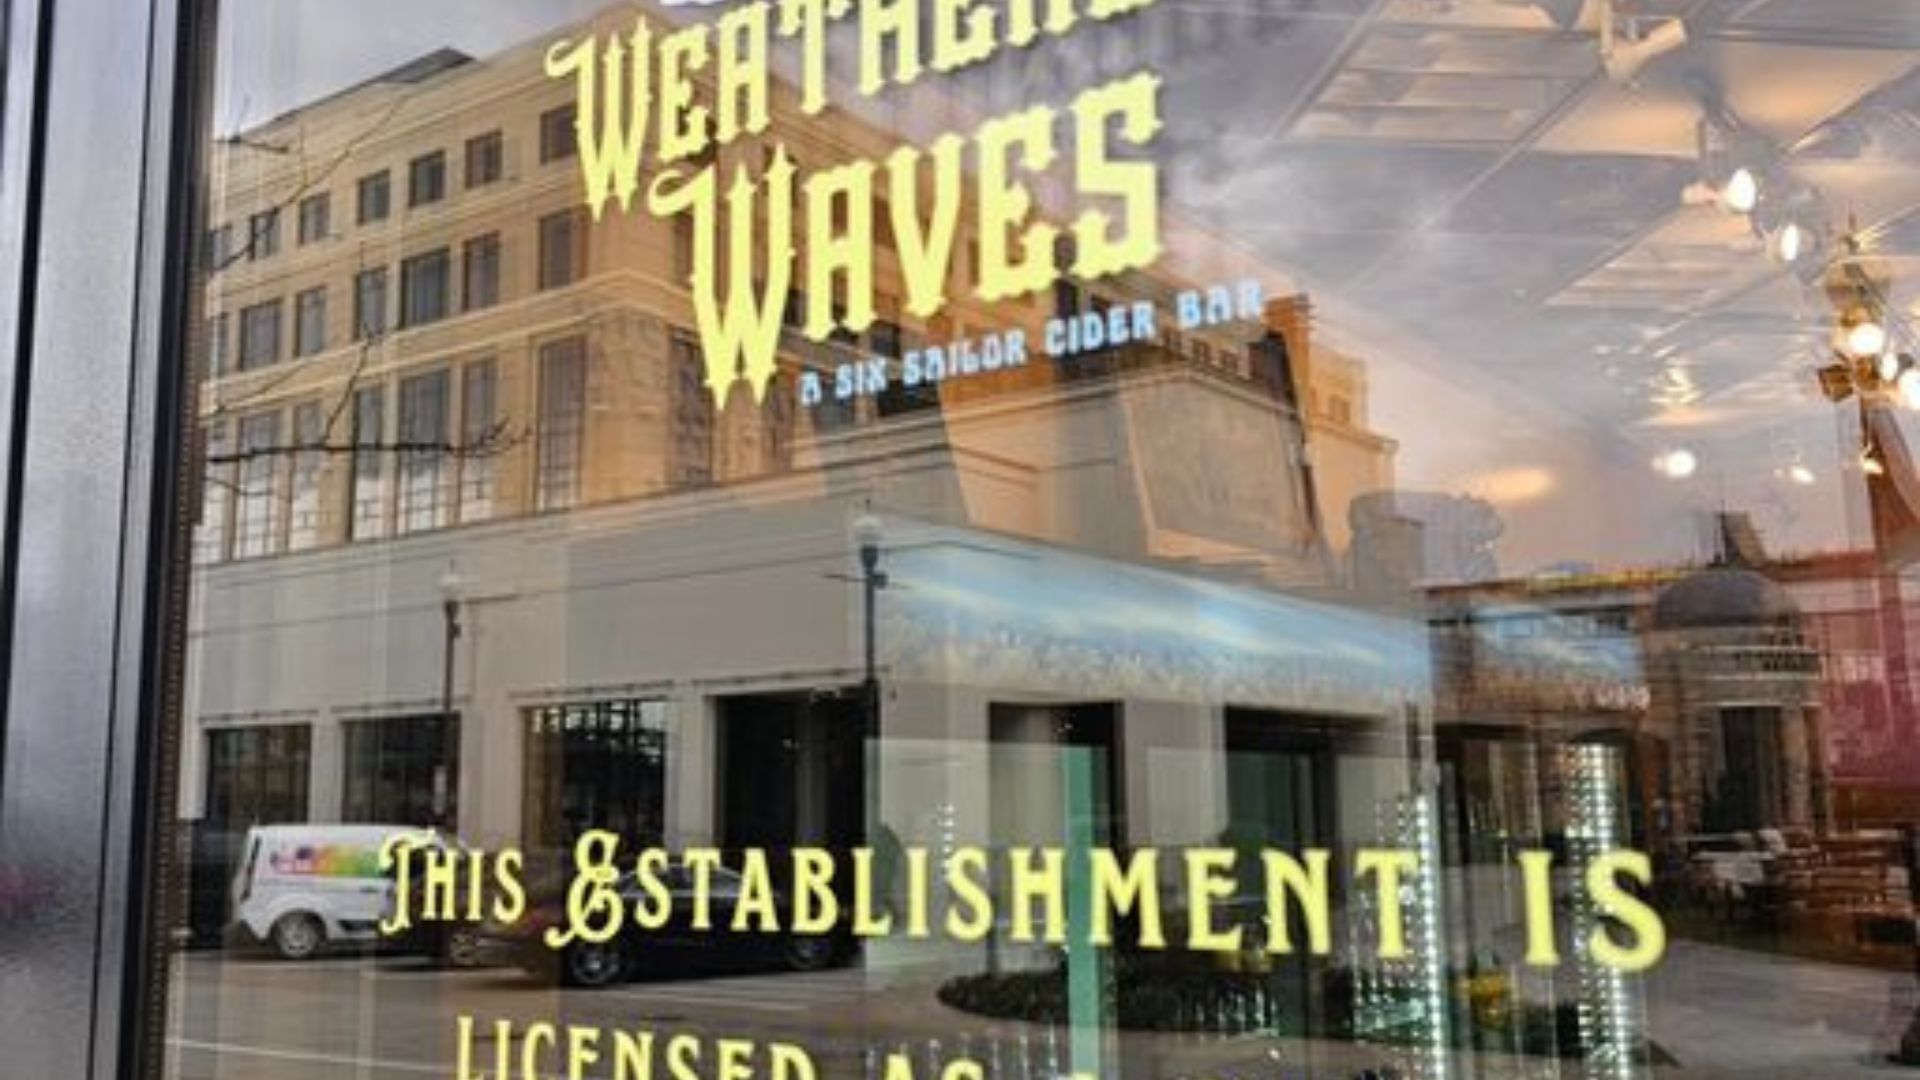 The Utah Attorney General's office said Weathered Waves, a bar that posted a notice saying it would...